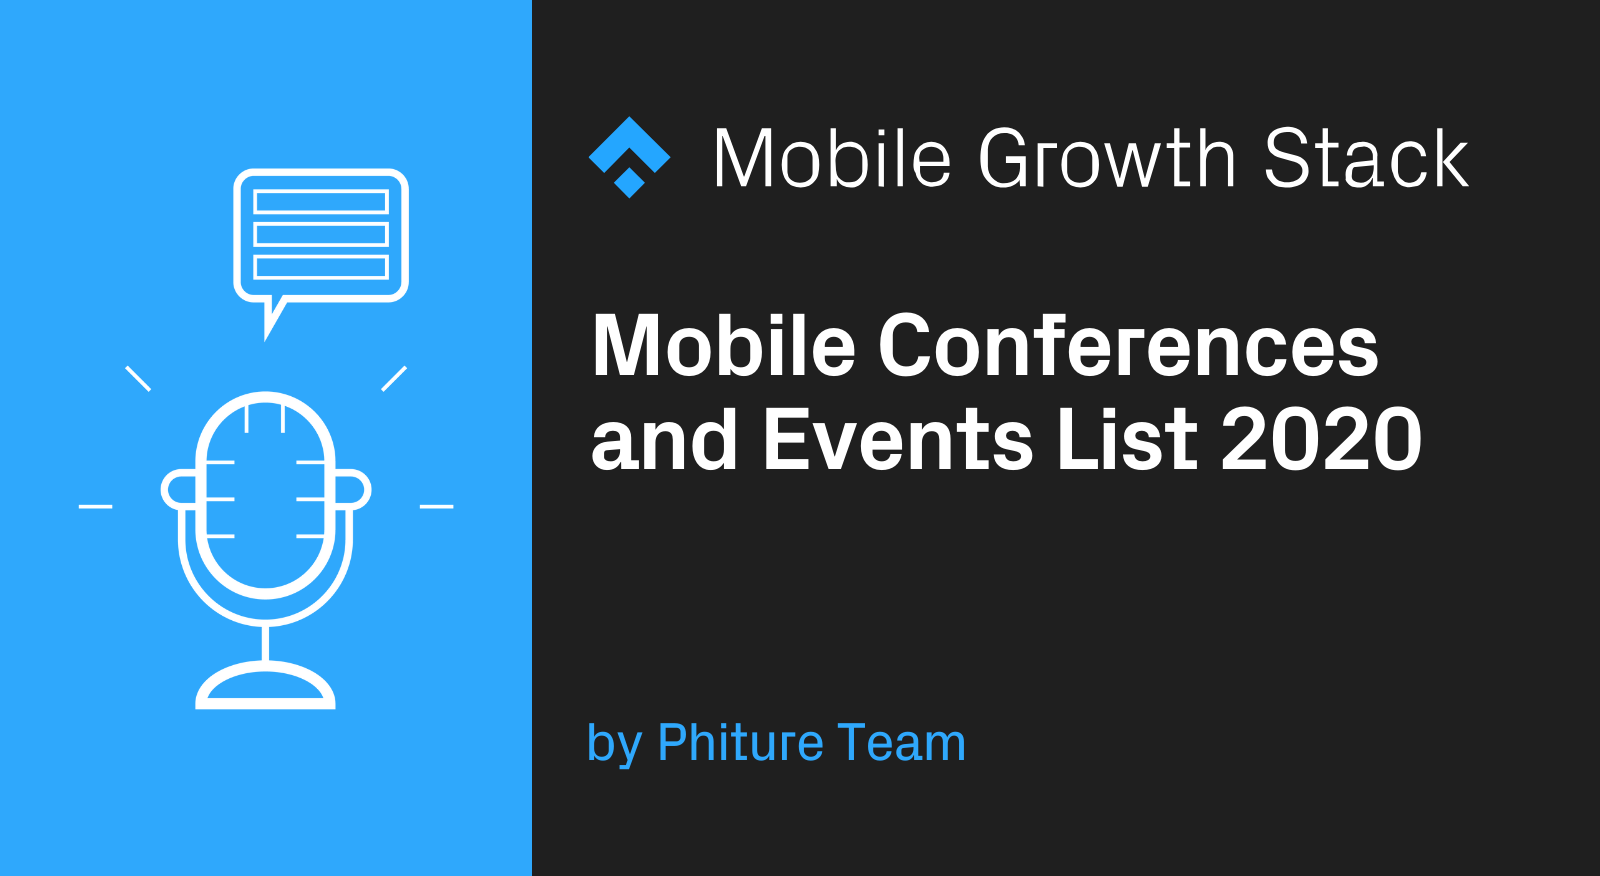 Mobile Conferences and Events List 2020